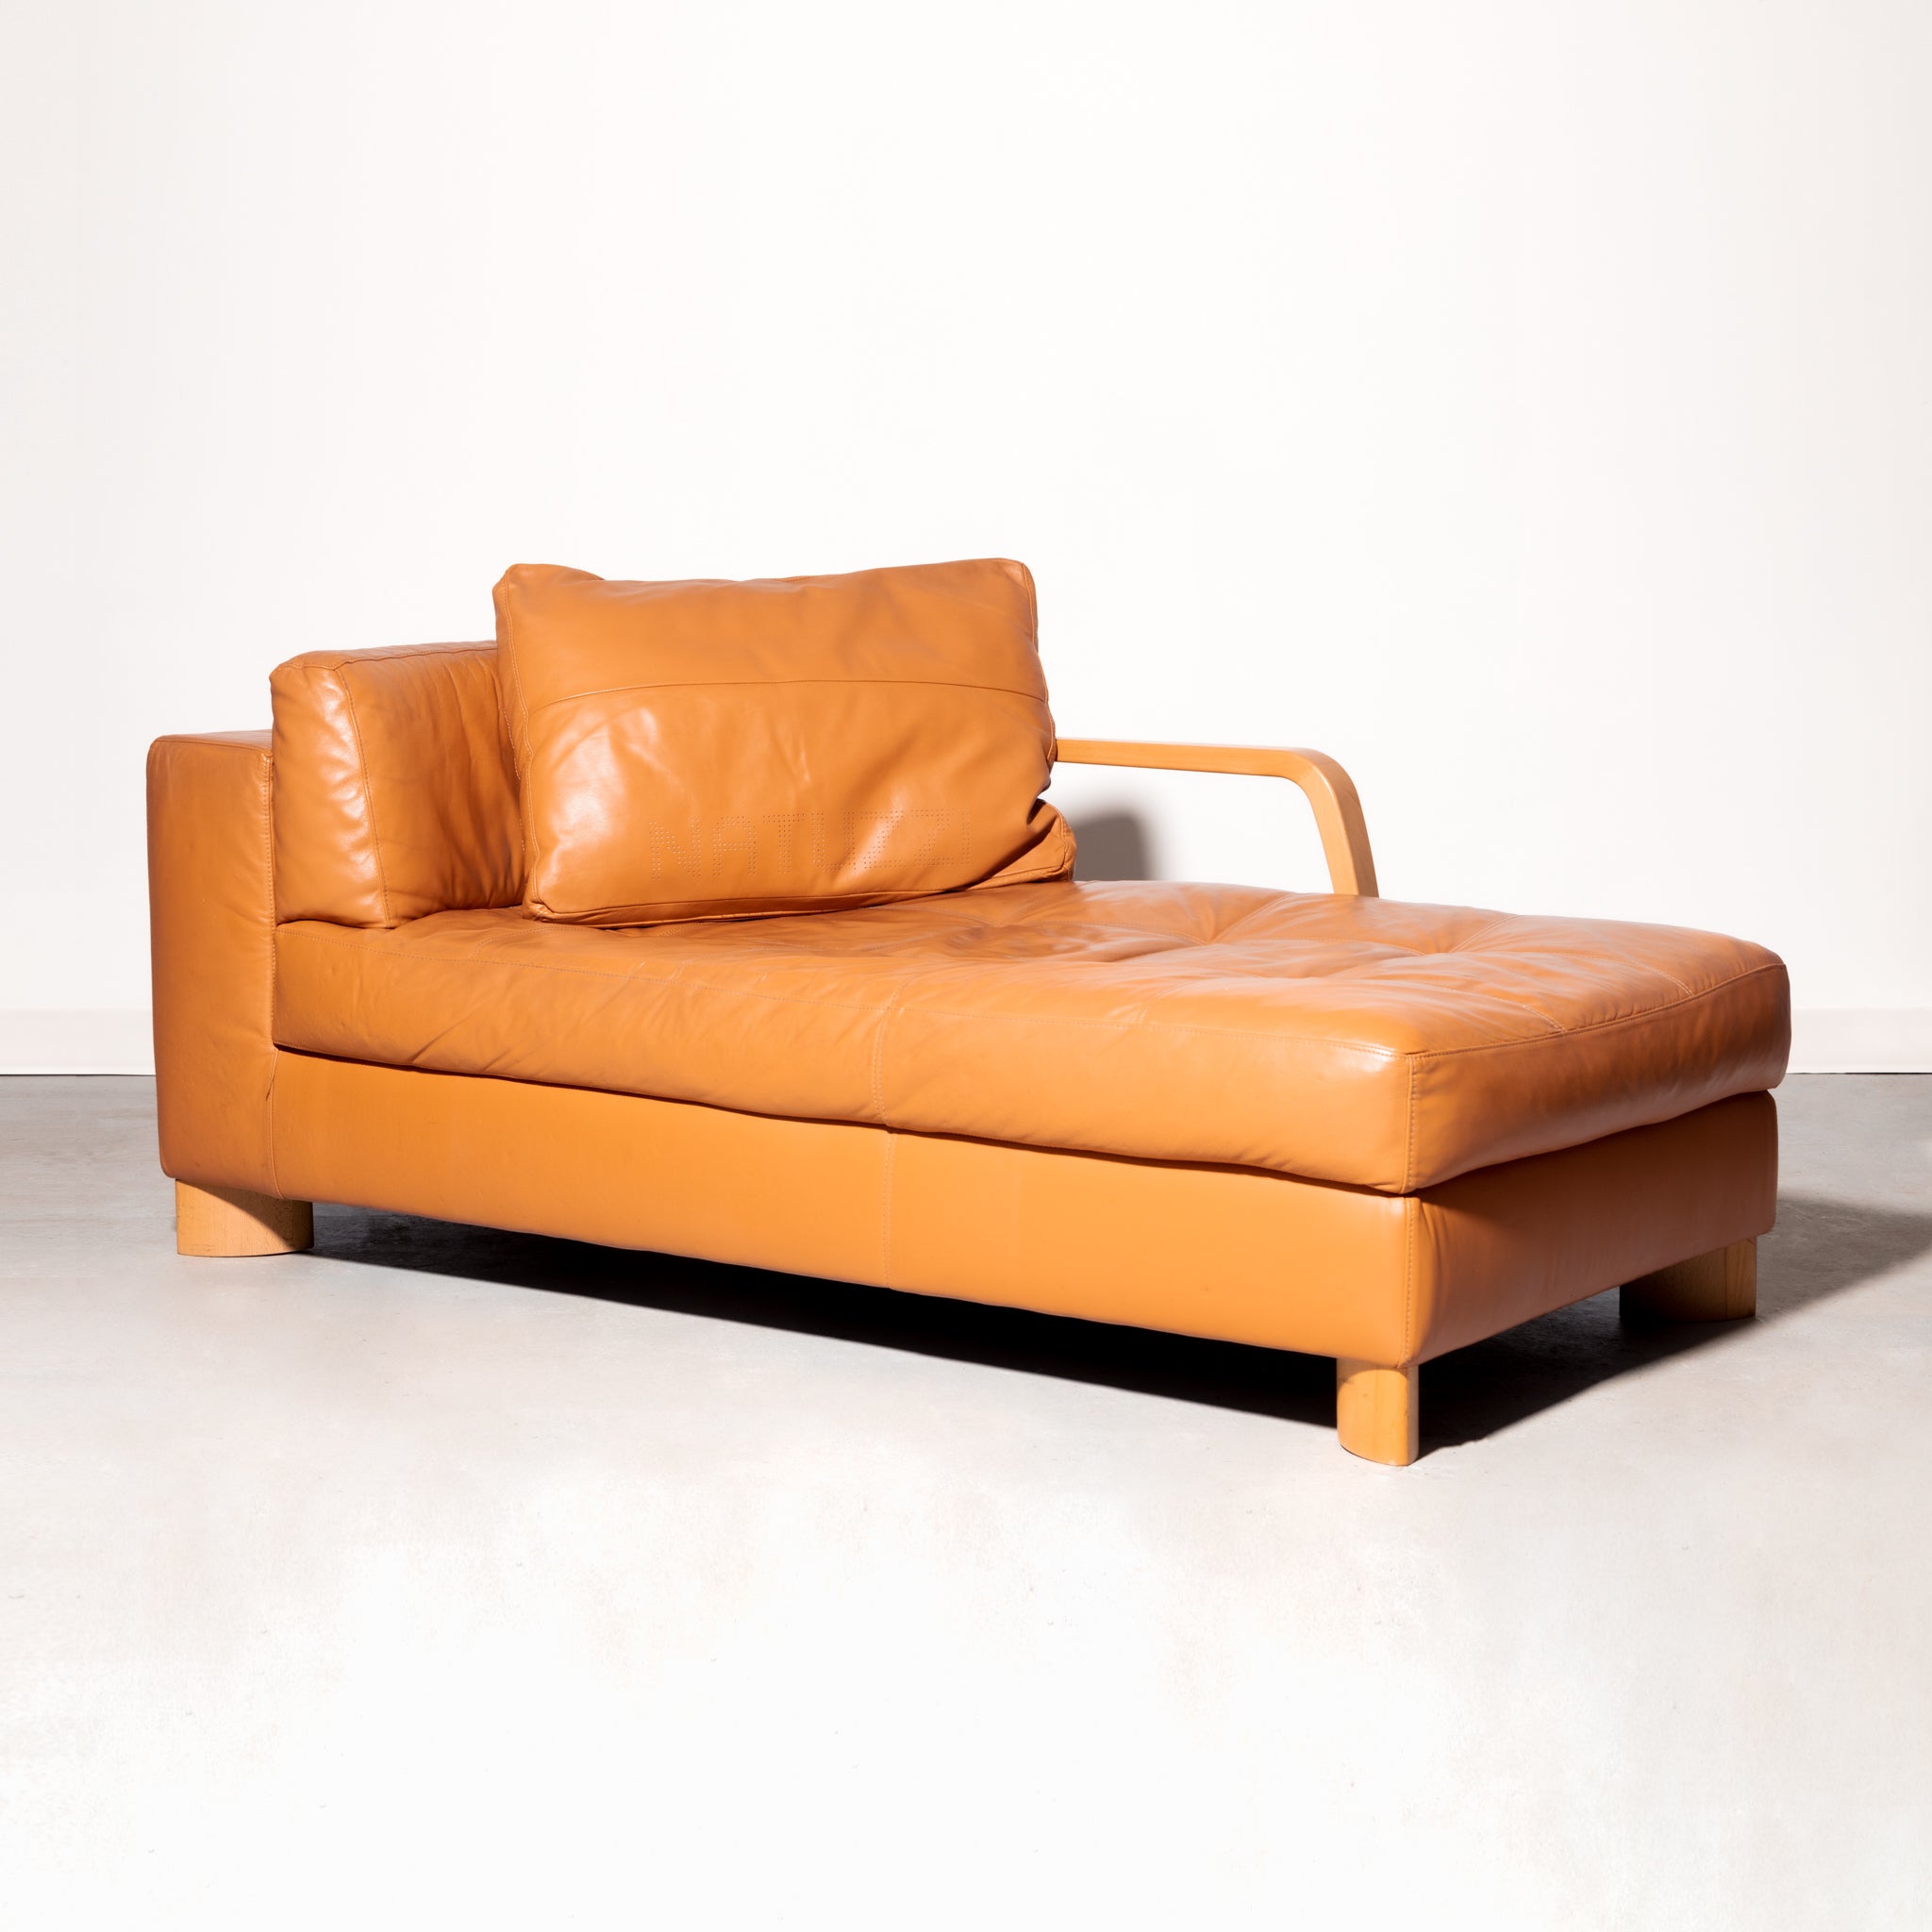 Natuzzi Italian Leather Chaise with perforated logo on the pillow